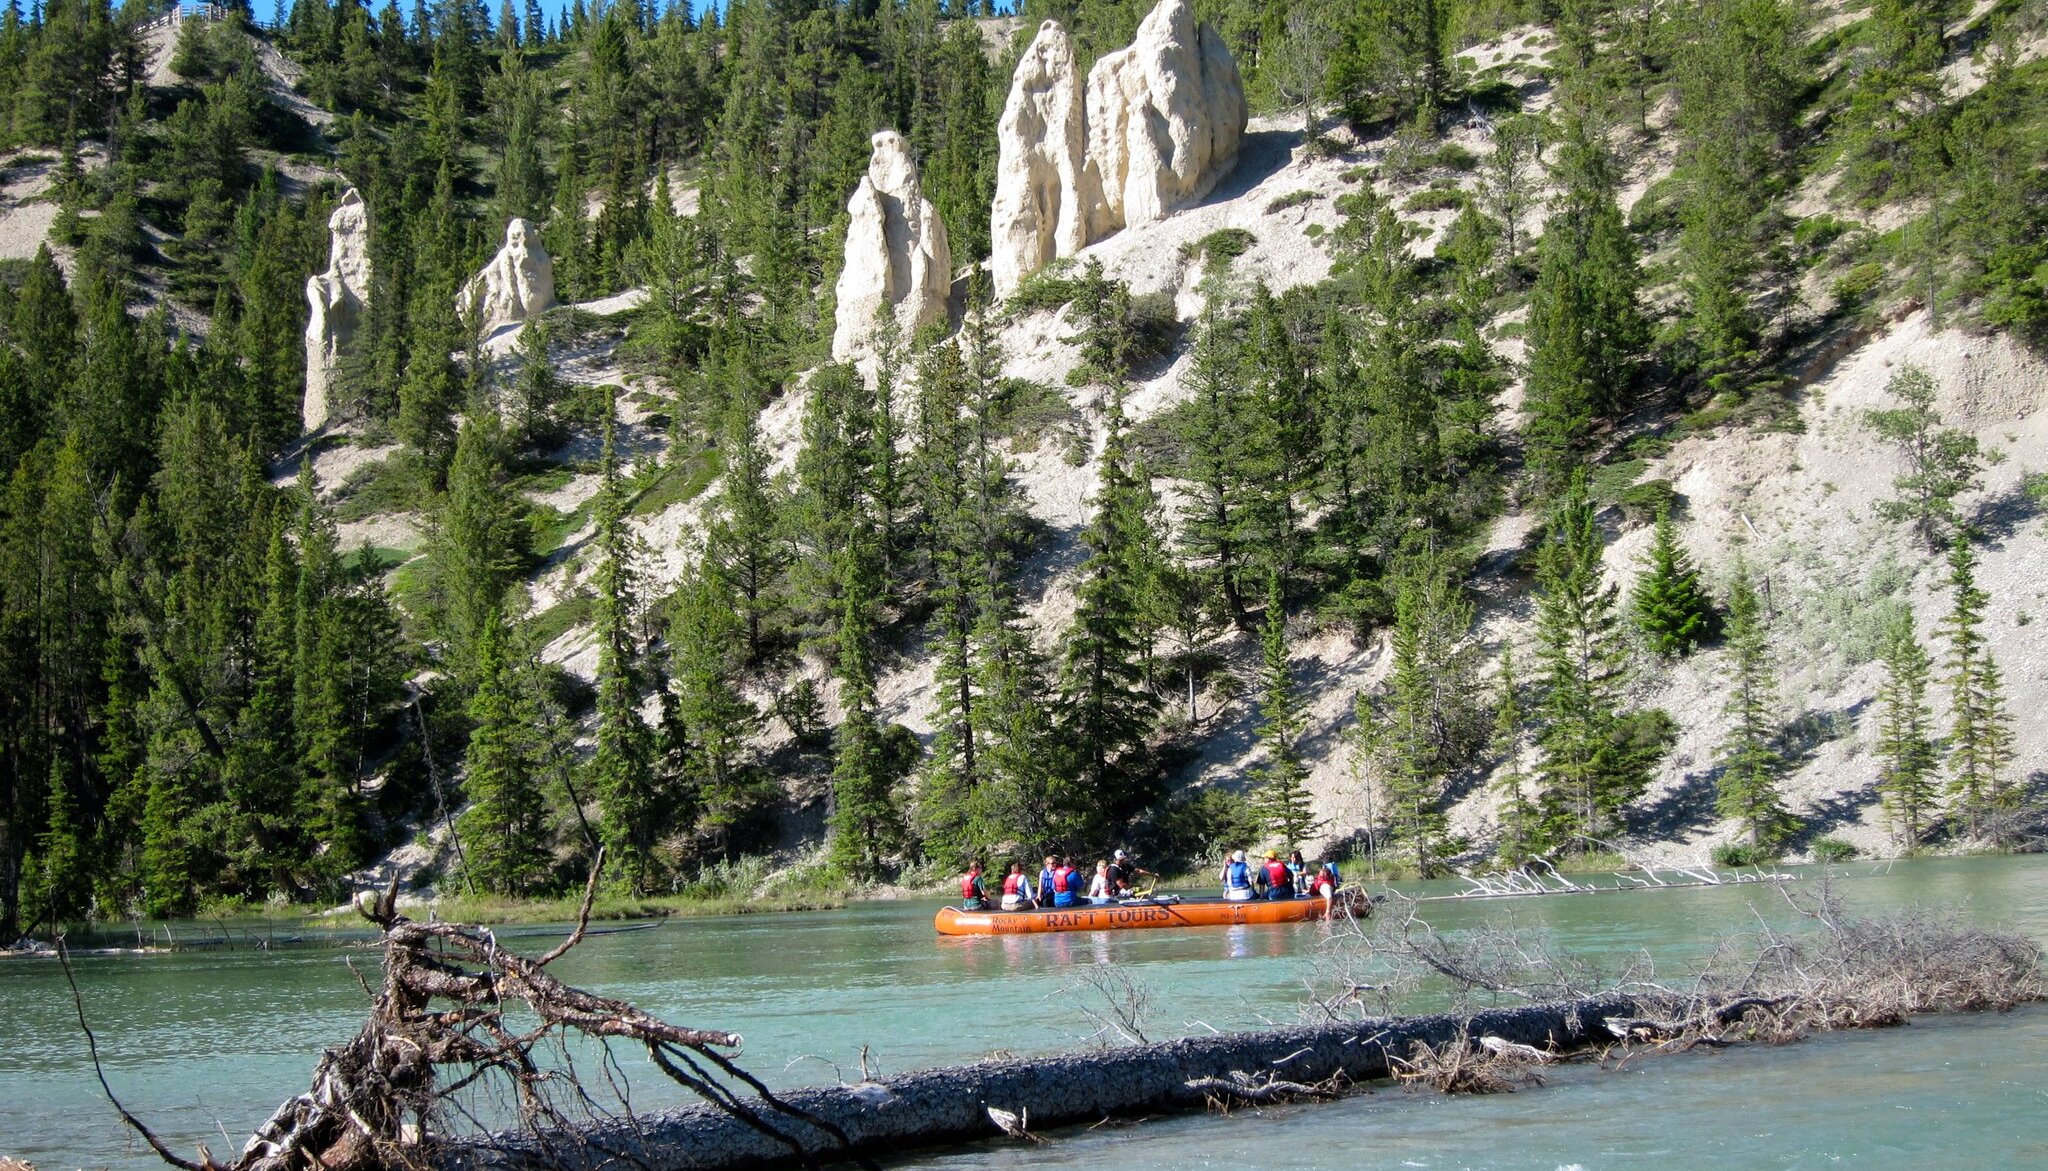 Floating past the hoodoo rocks on the Bow River